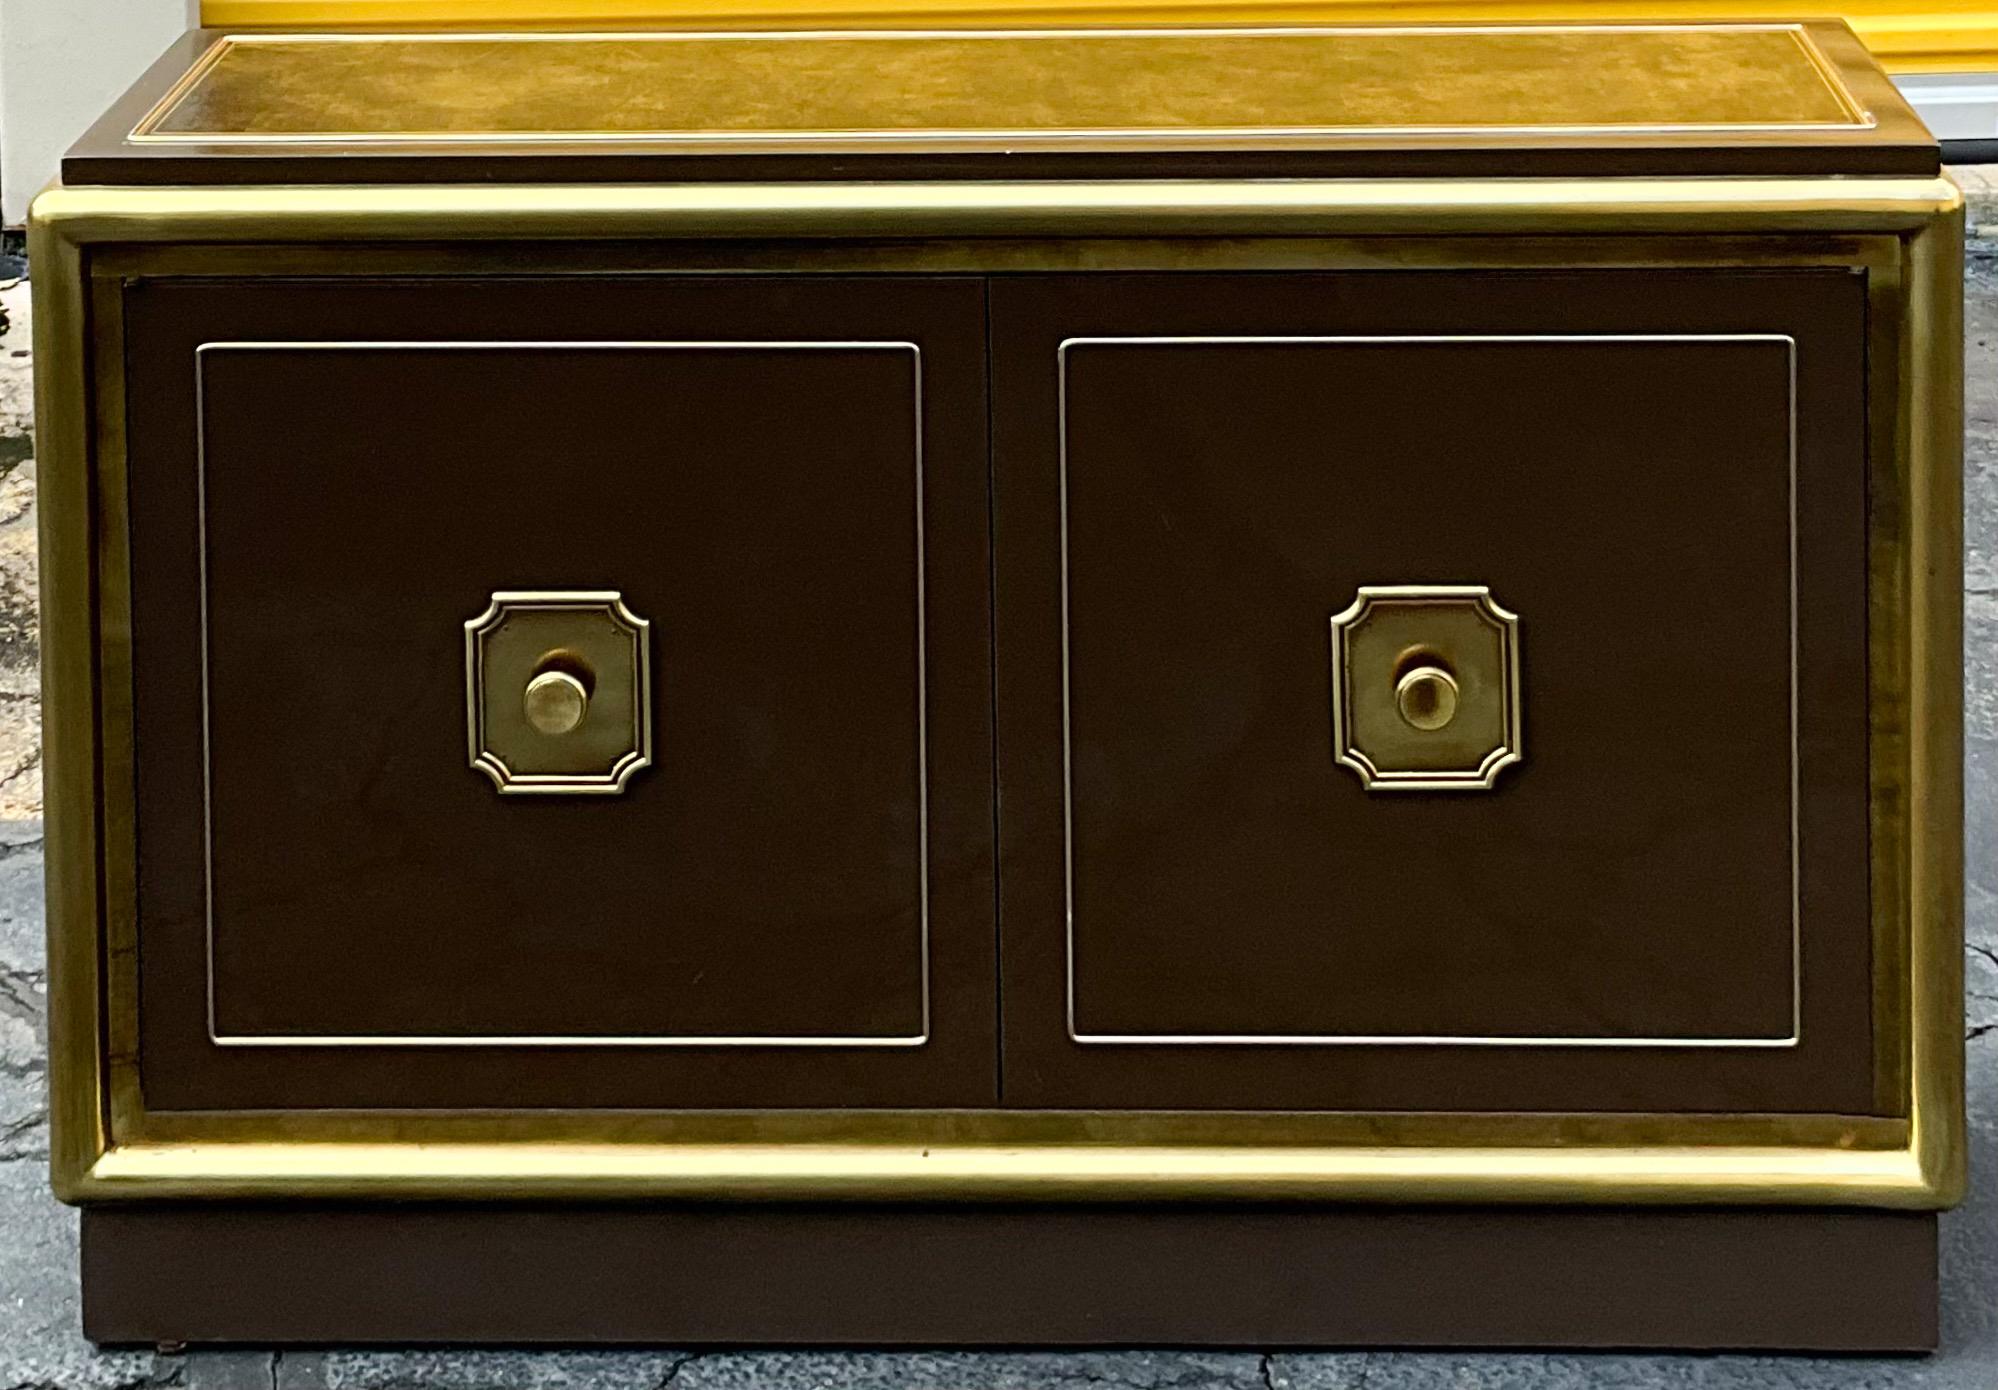 This is a unique piece by Mastercraft! I think it is post 1974 when they were purchased by Baker Furniture. It is a brown lacquer with tubular brass accents. The top appears to be a faux marbleized leather. It opens to an adjustable shelving. There